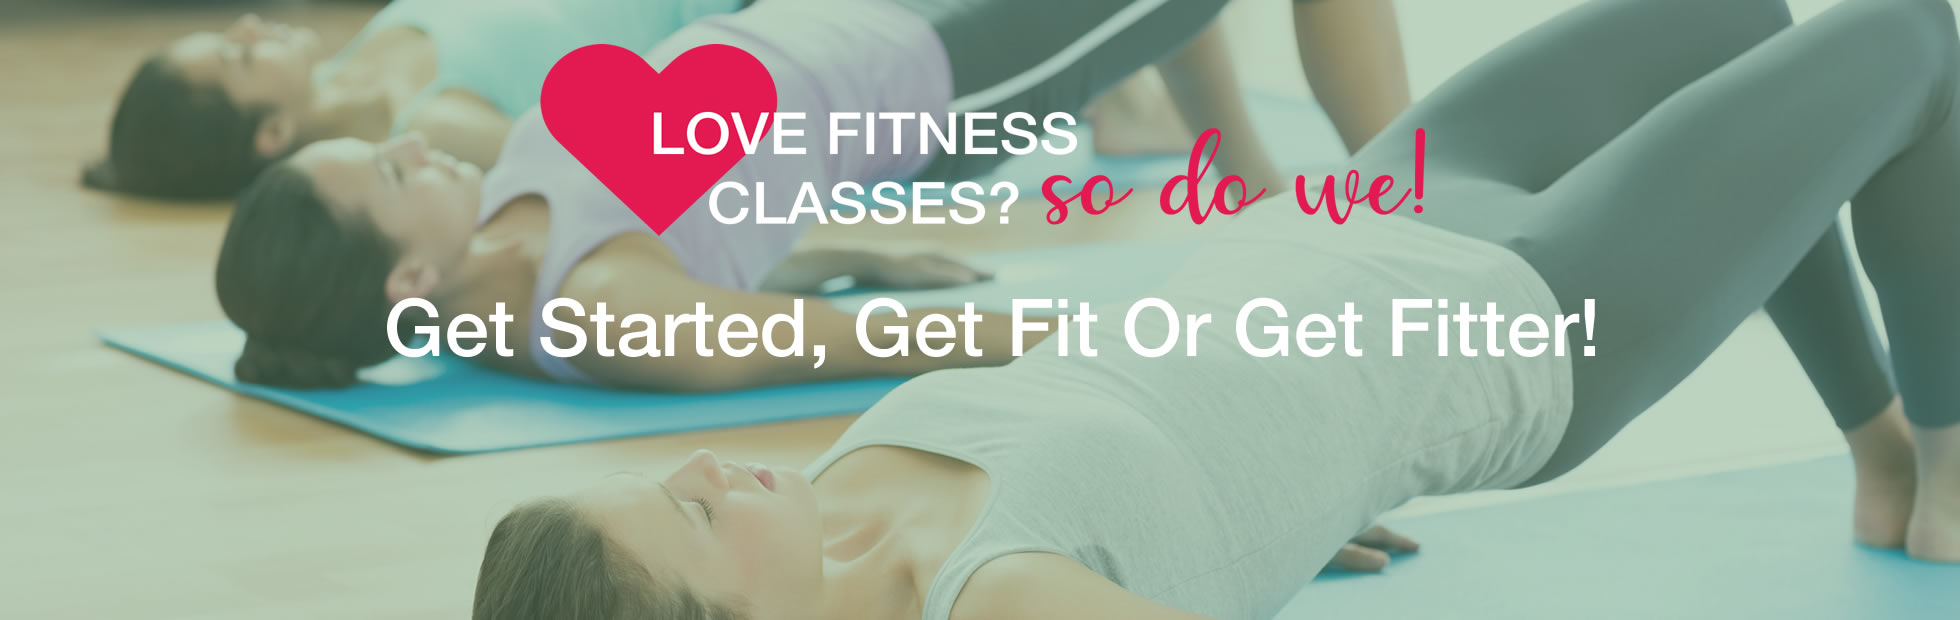 get fitter skipton health and fitness classes